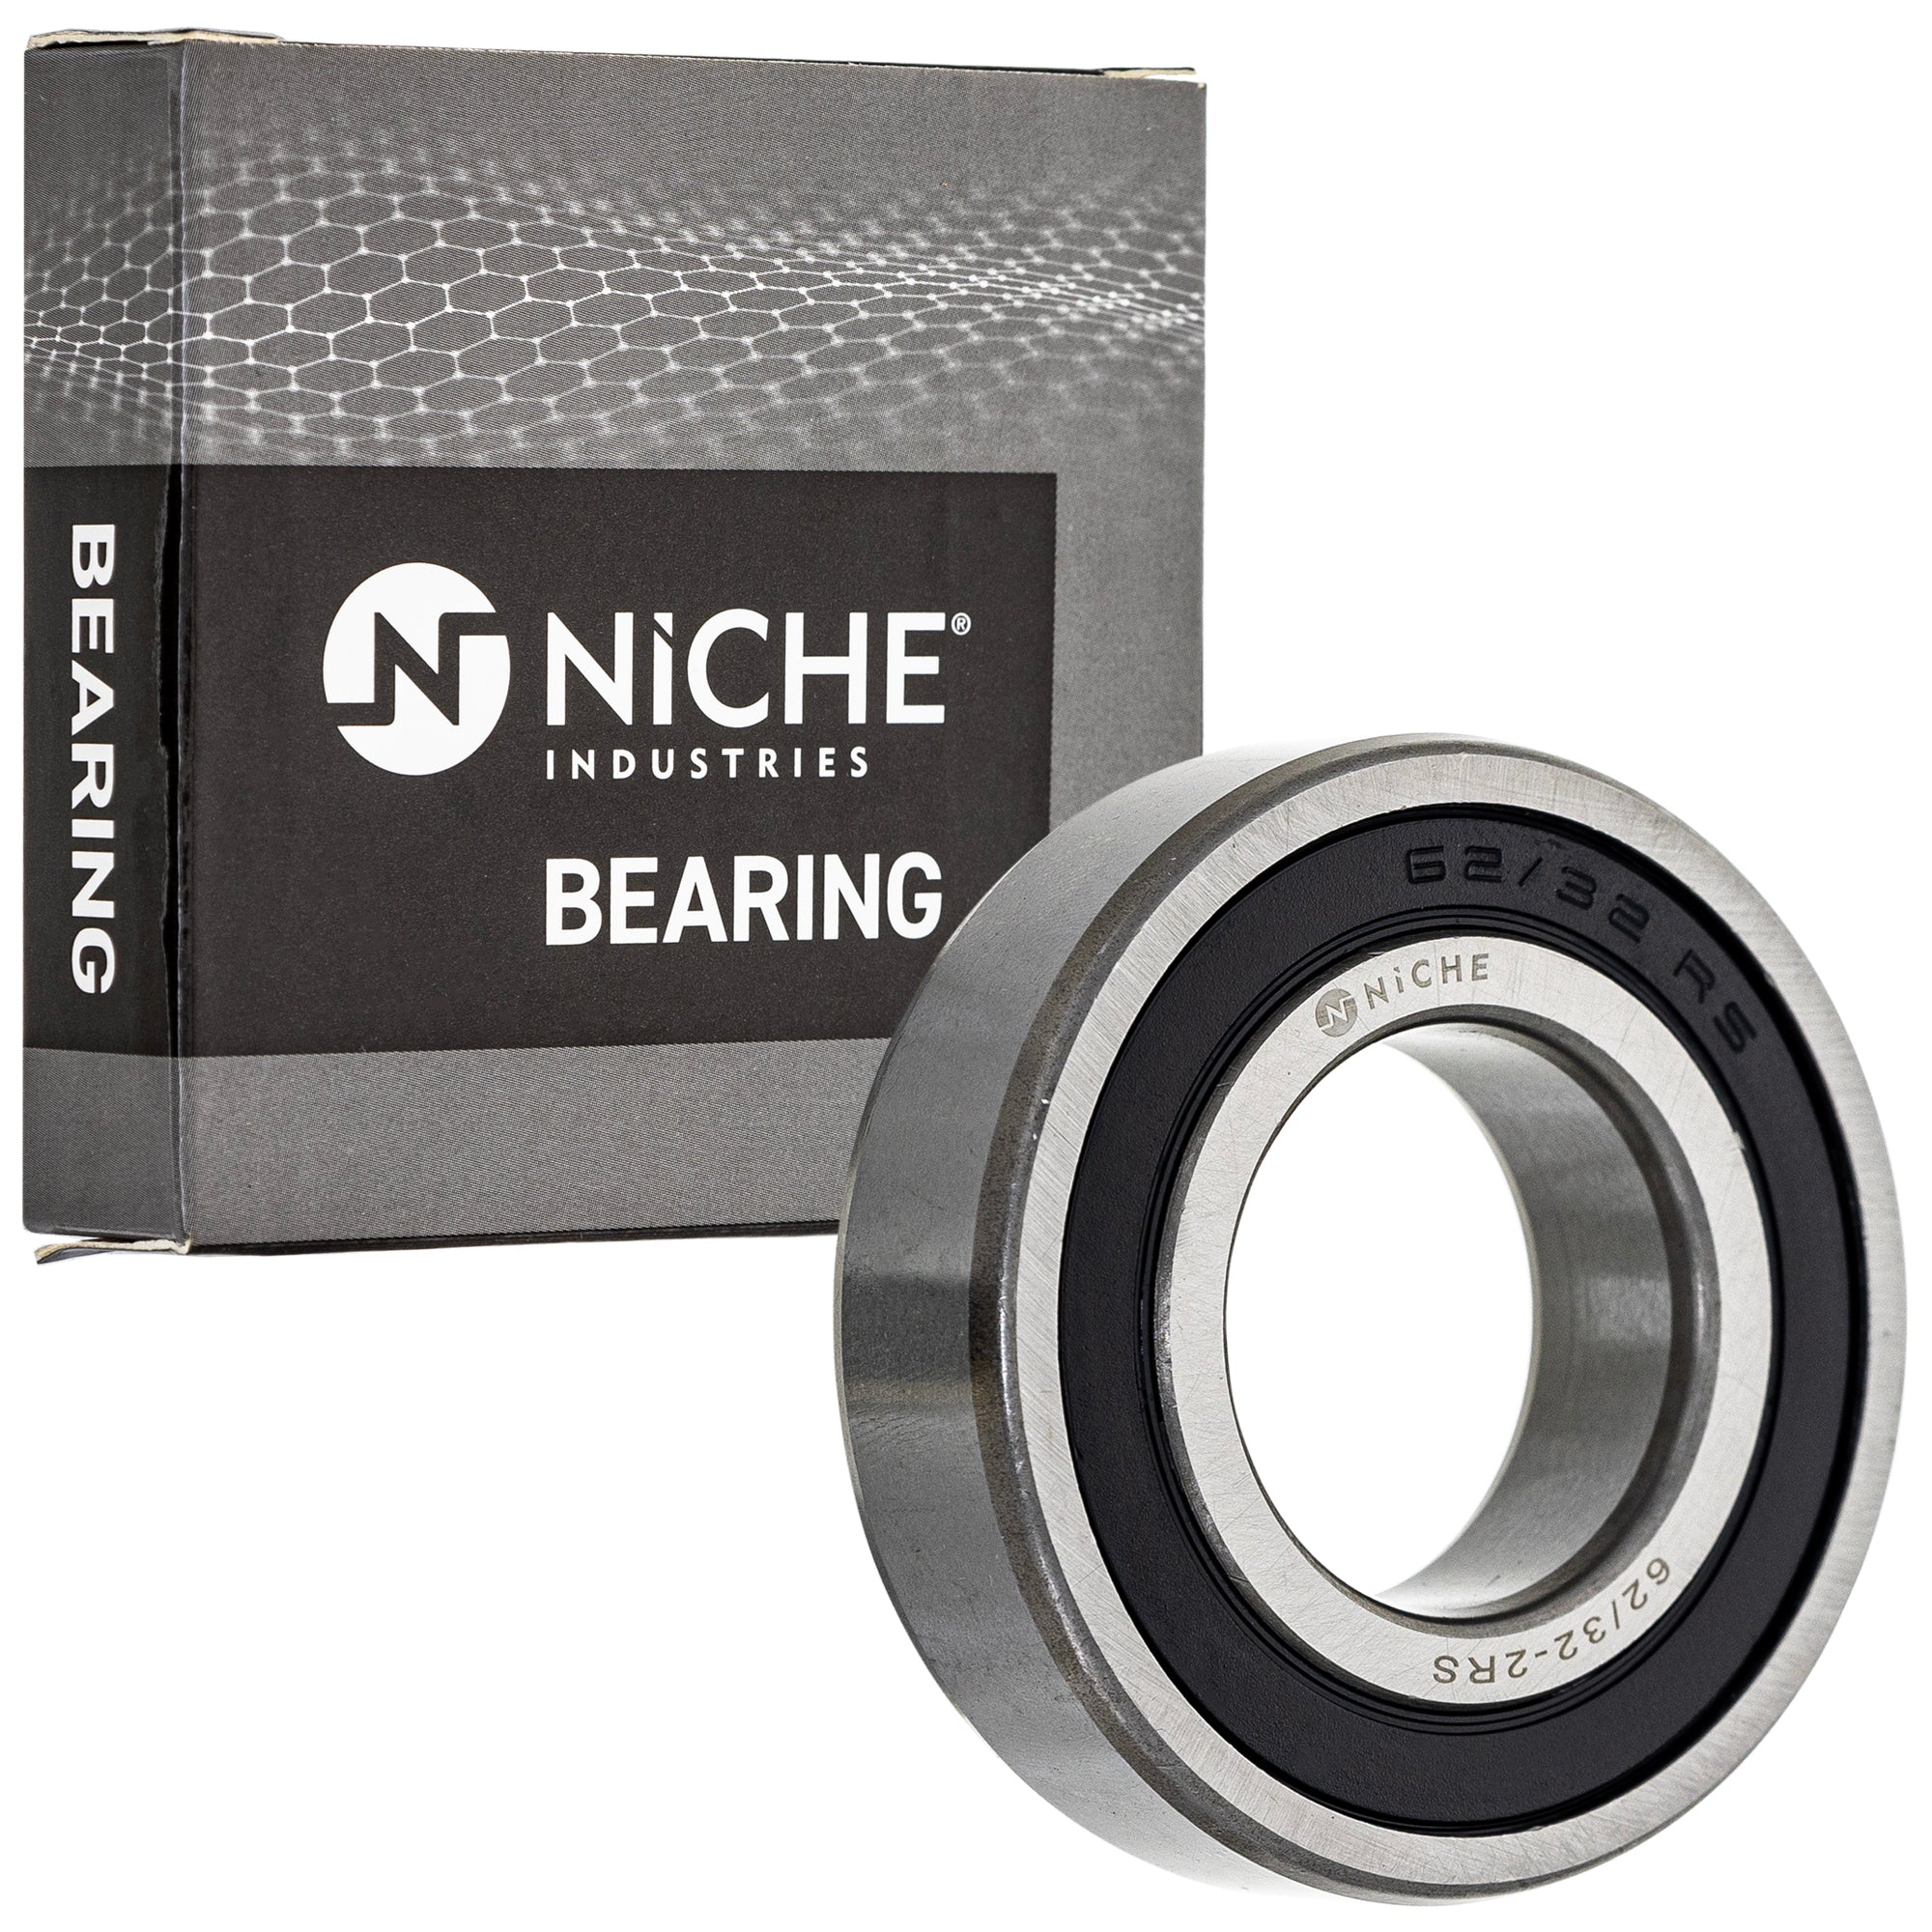 NICHE 519-CBB2282R Bearing 10-Pack for zOTHER